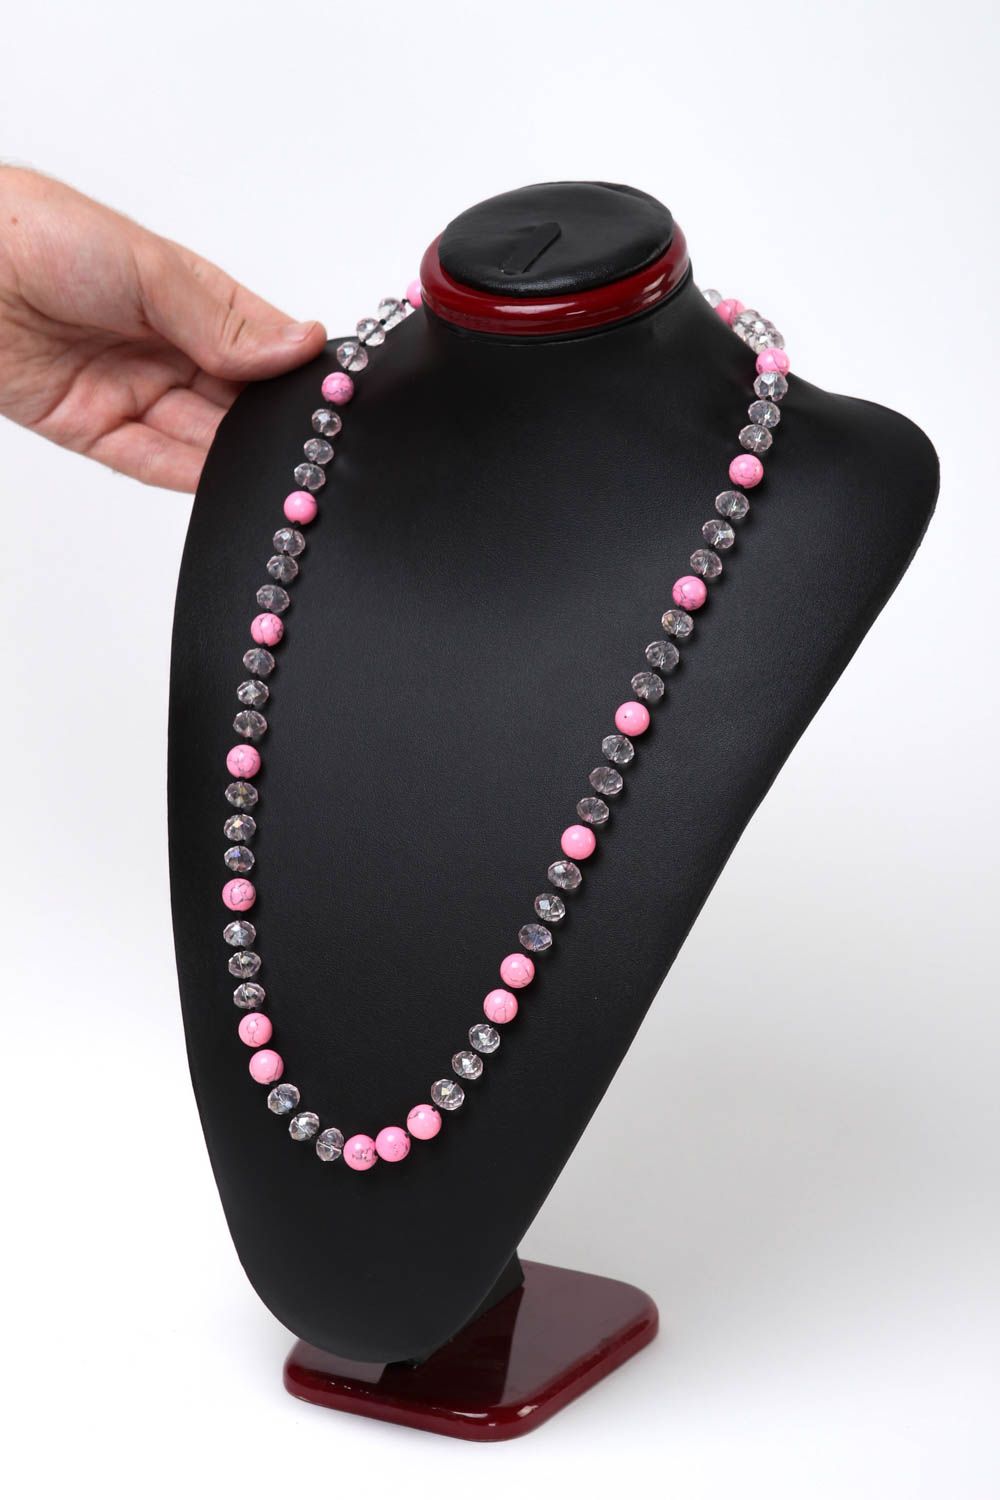 Handcrafted jewelry long necklace fashion necklaces for women gemstone jewelry photo 5